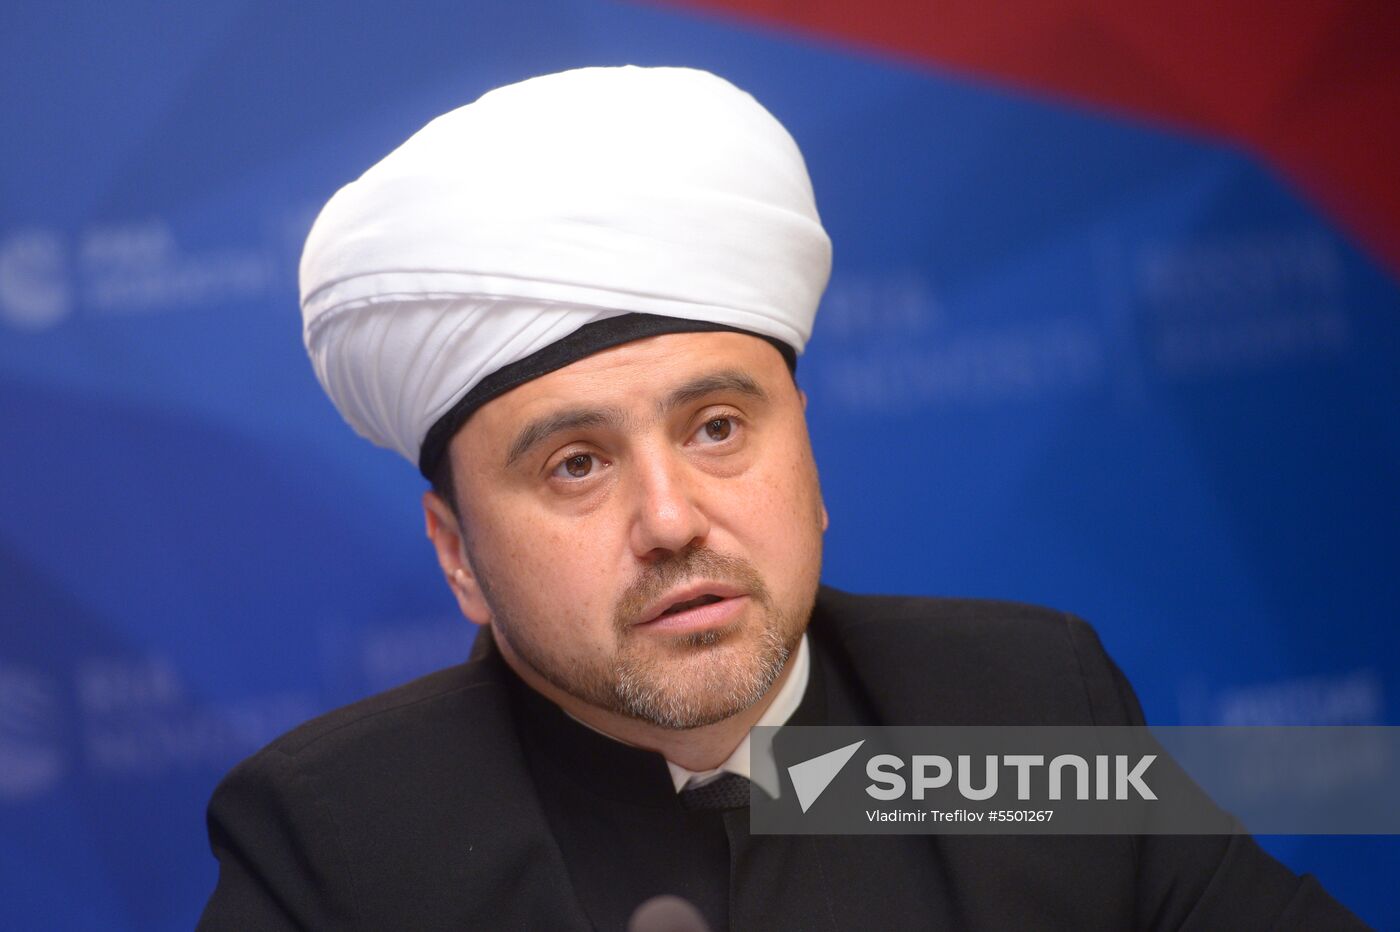 Moscow-Simferopol video conference on the beginning of Ramadan and fasting